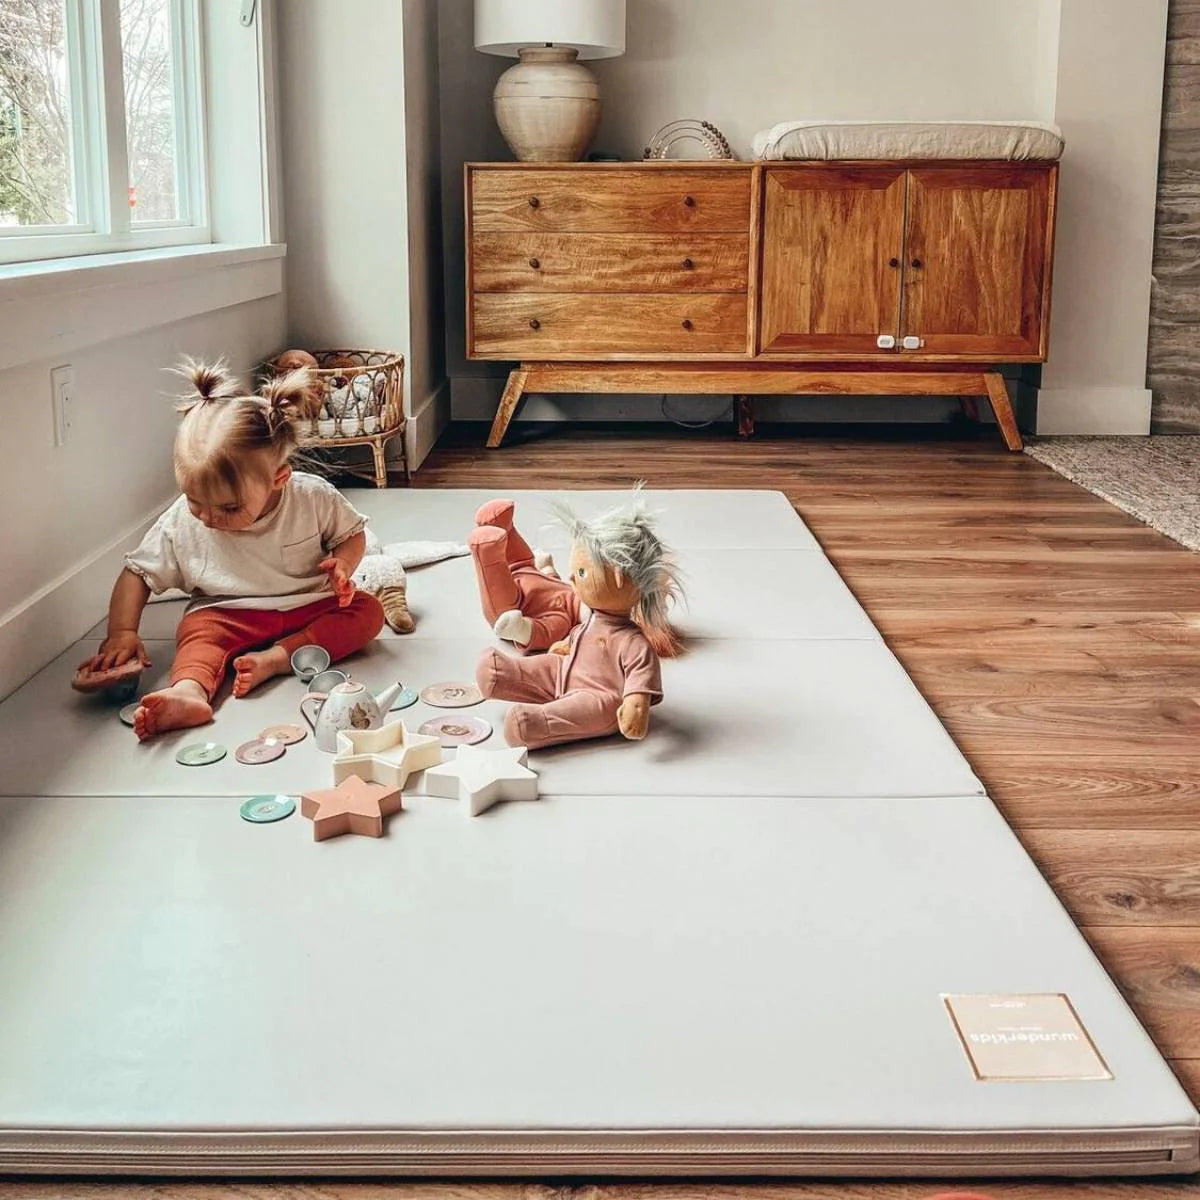 Toddler playing on a non toxic playmat